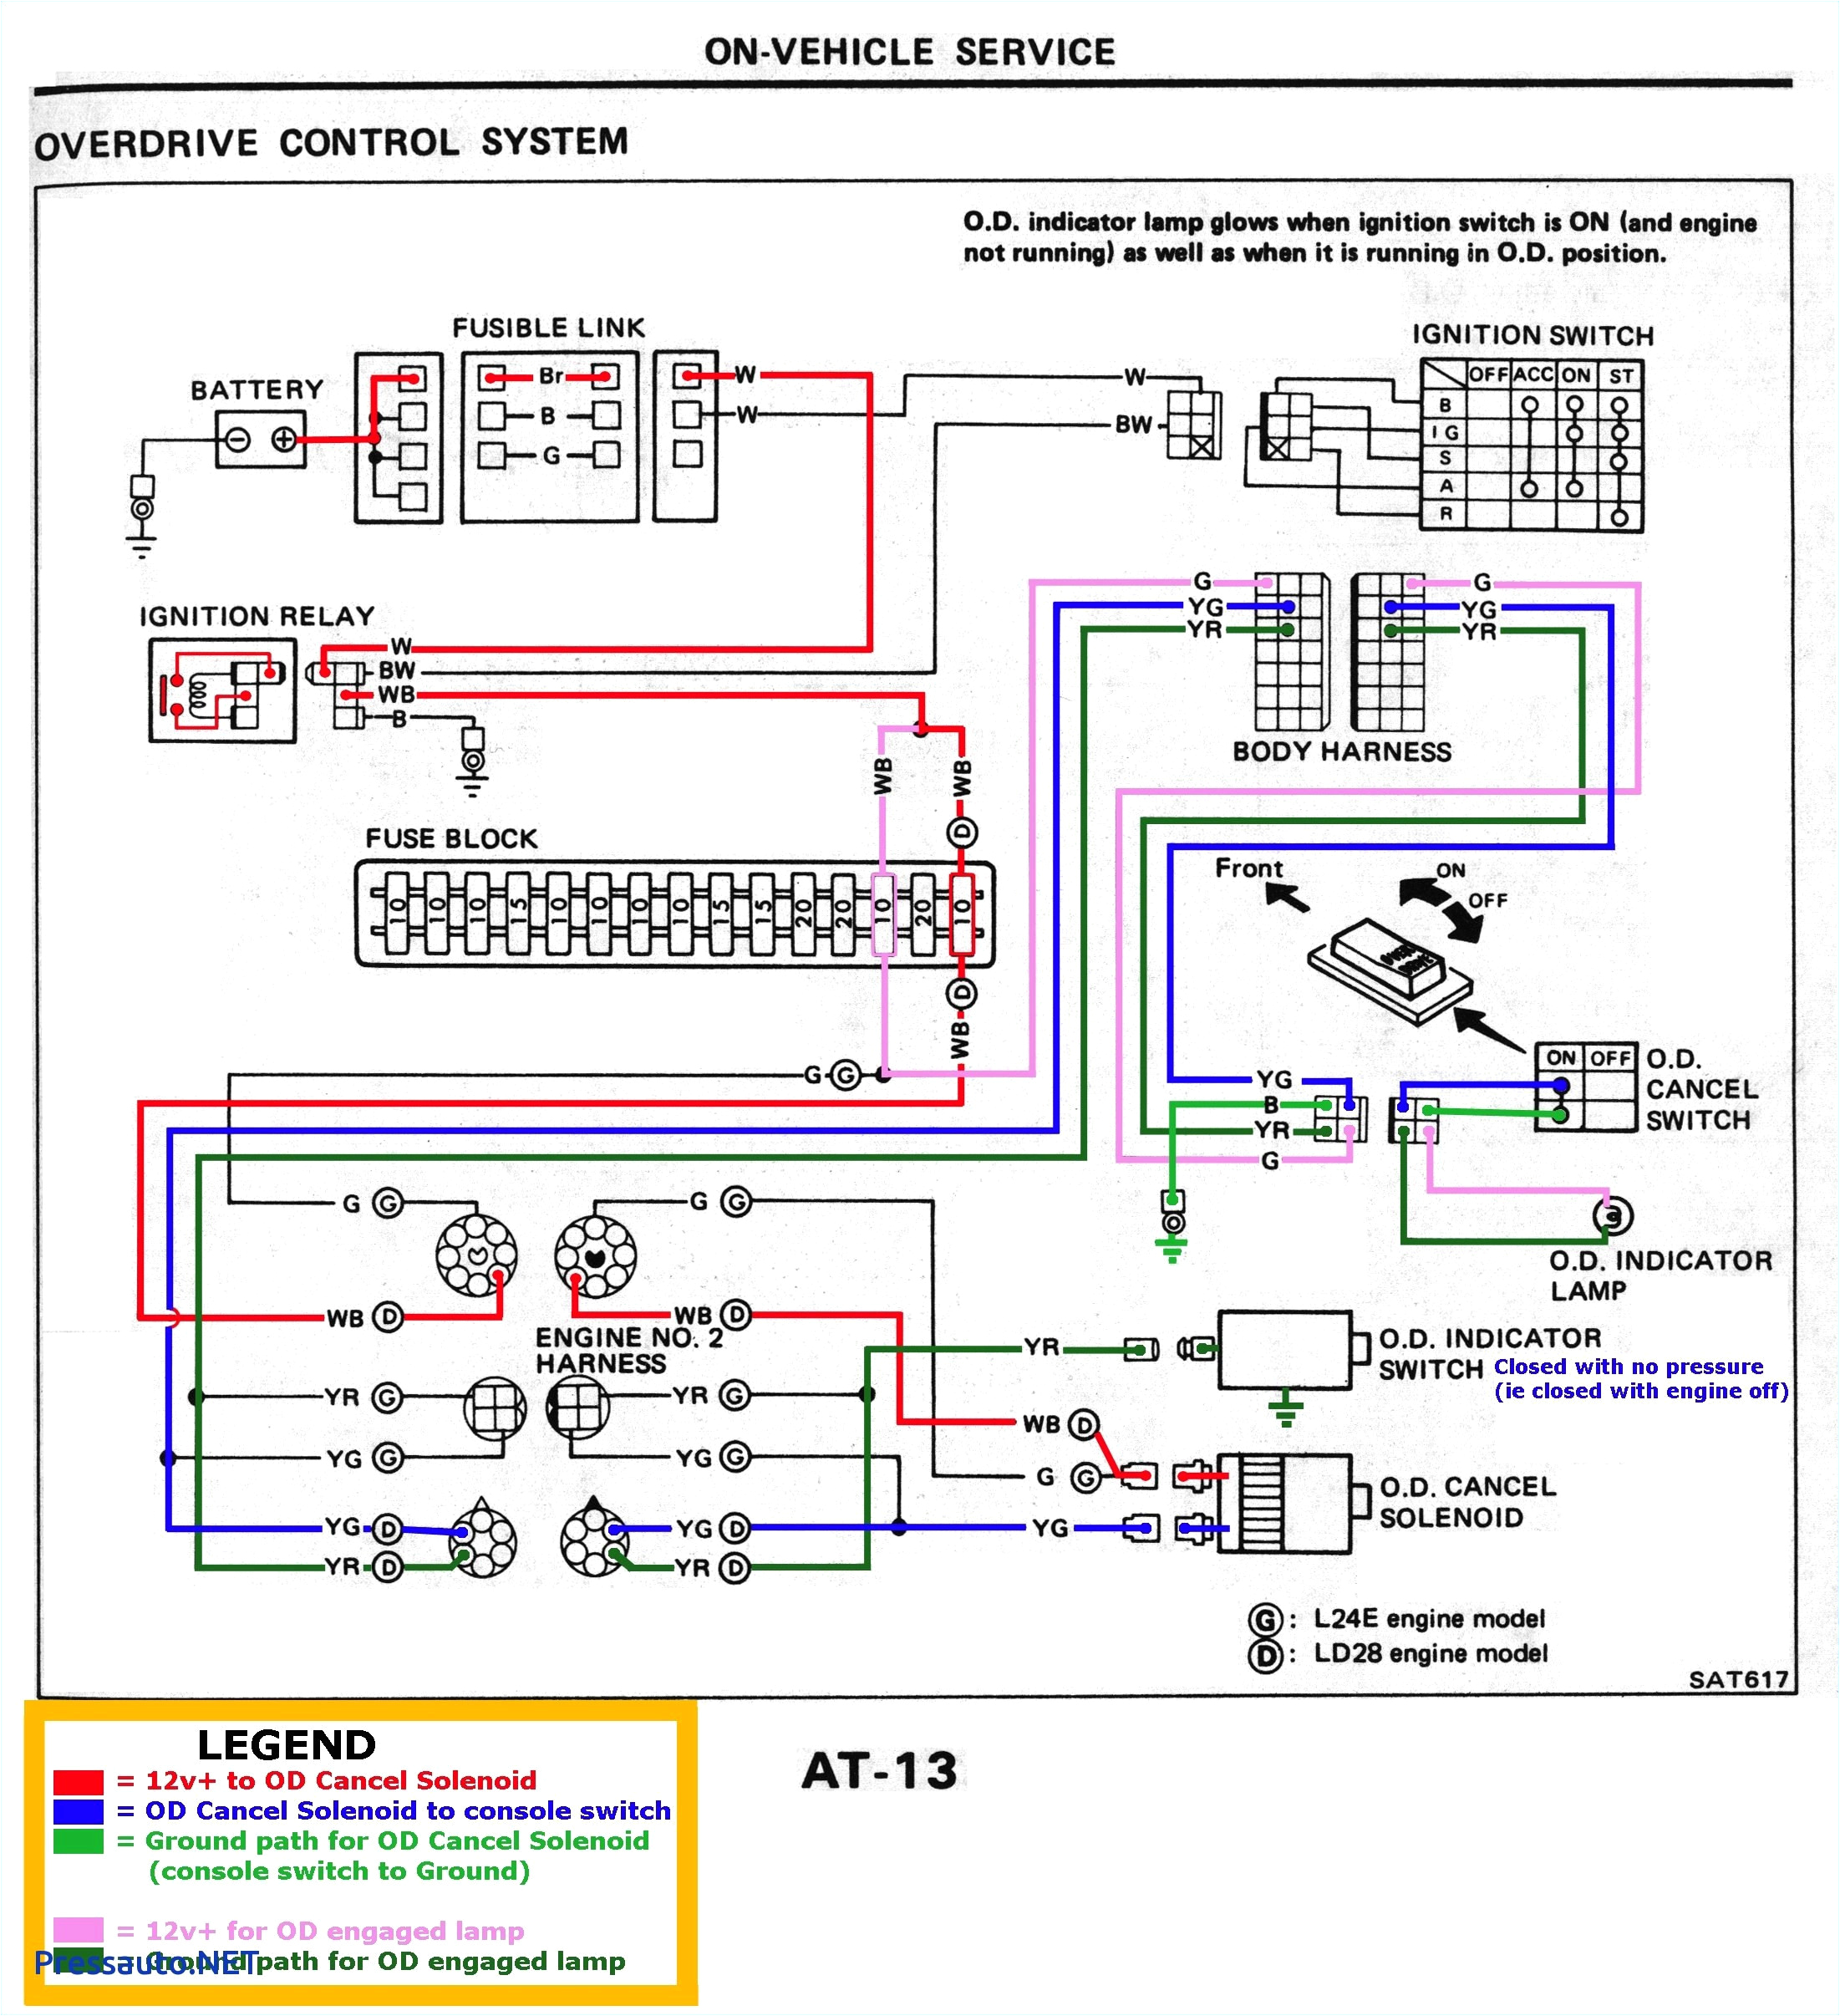 photo wiring diagram for electric scooter case 831 tractor wiring diagram wiring diagramscout ii rear wire